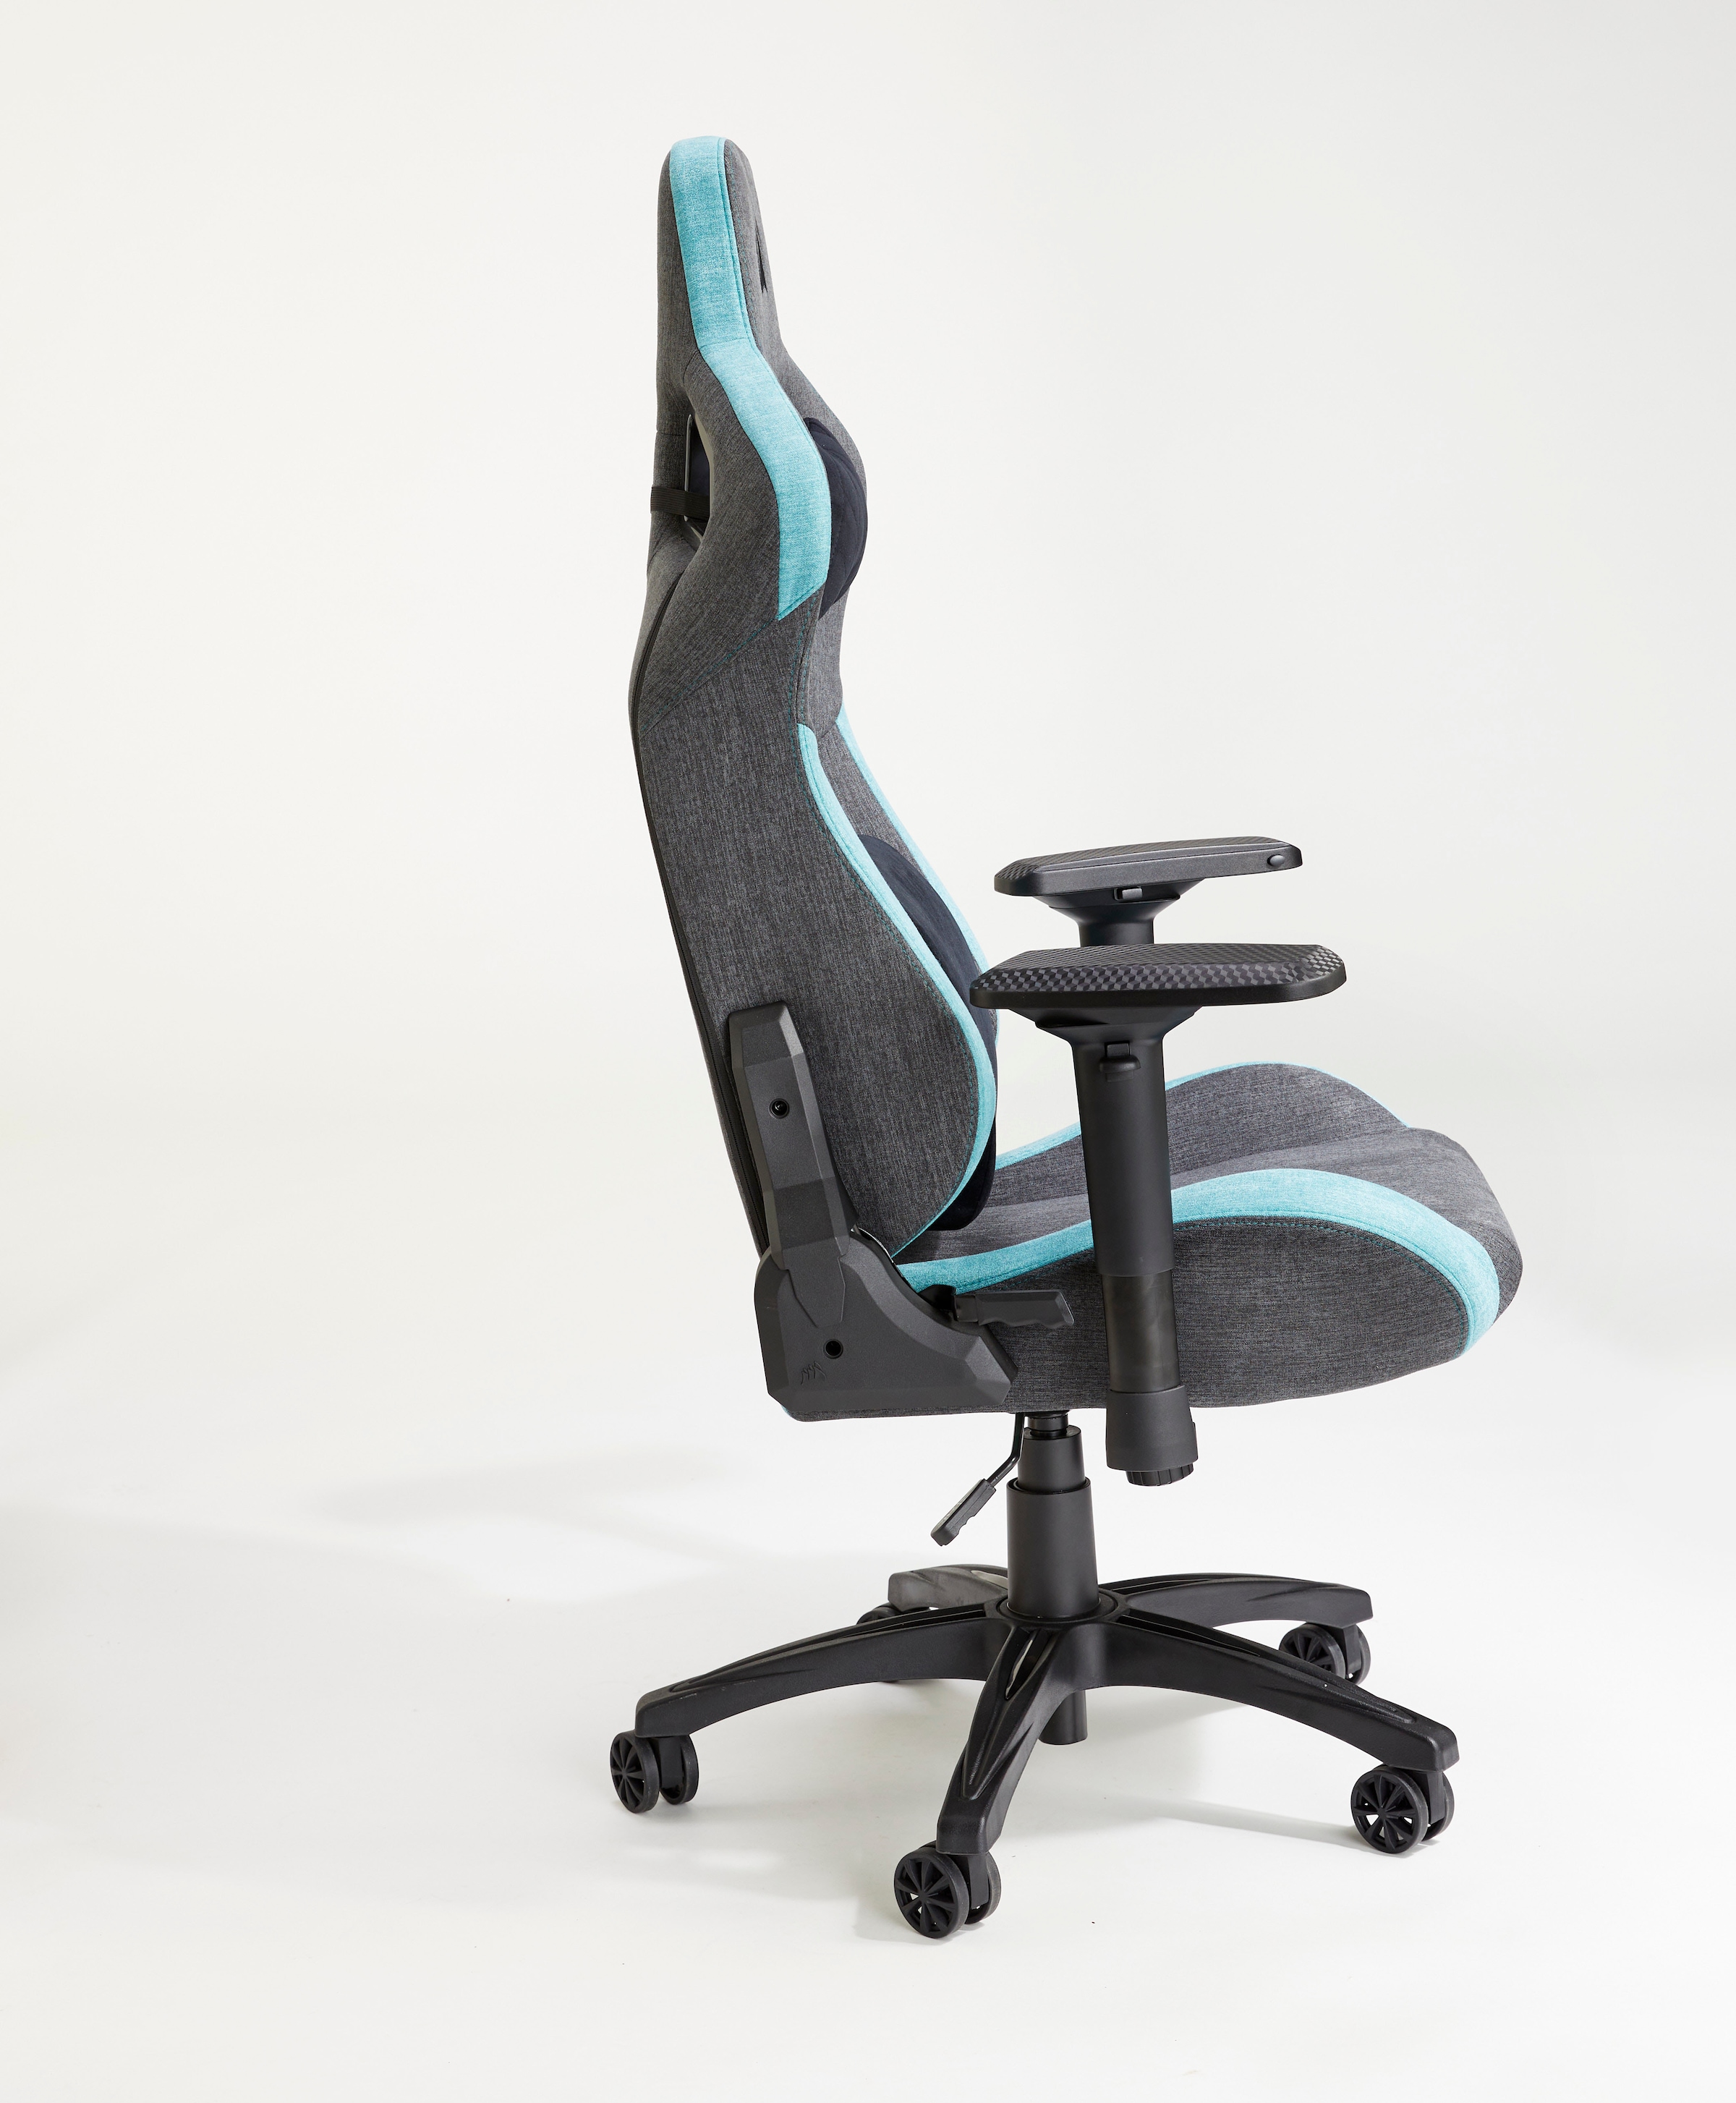 Soft Exterior Gaming Design, Corsair Racing-Inspired bei online Fabric Gaming Rush Chair Chair«, »T3 UNIVERSAL Fabric